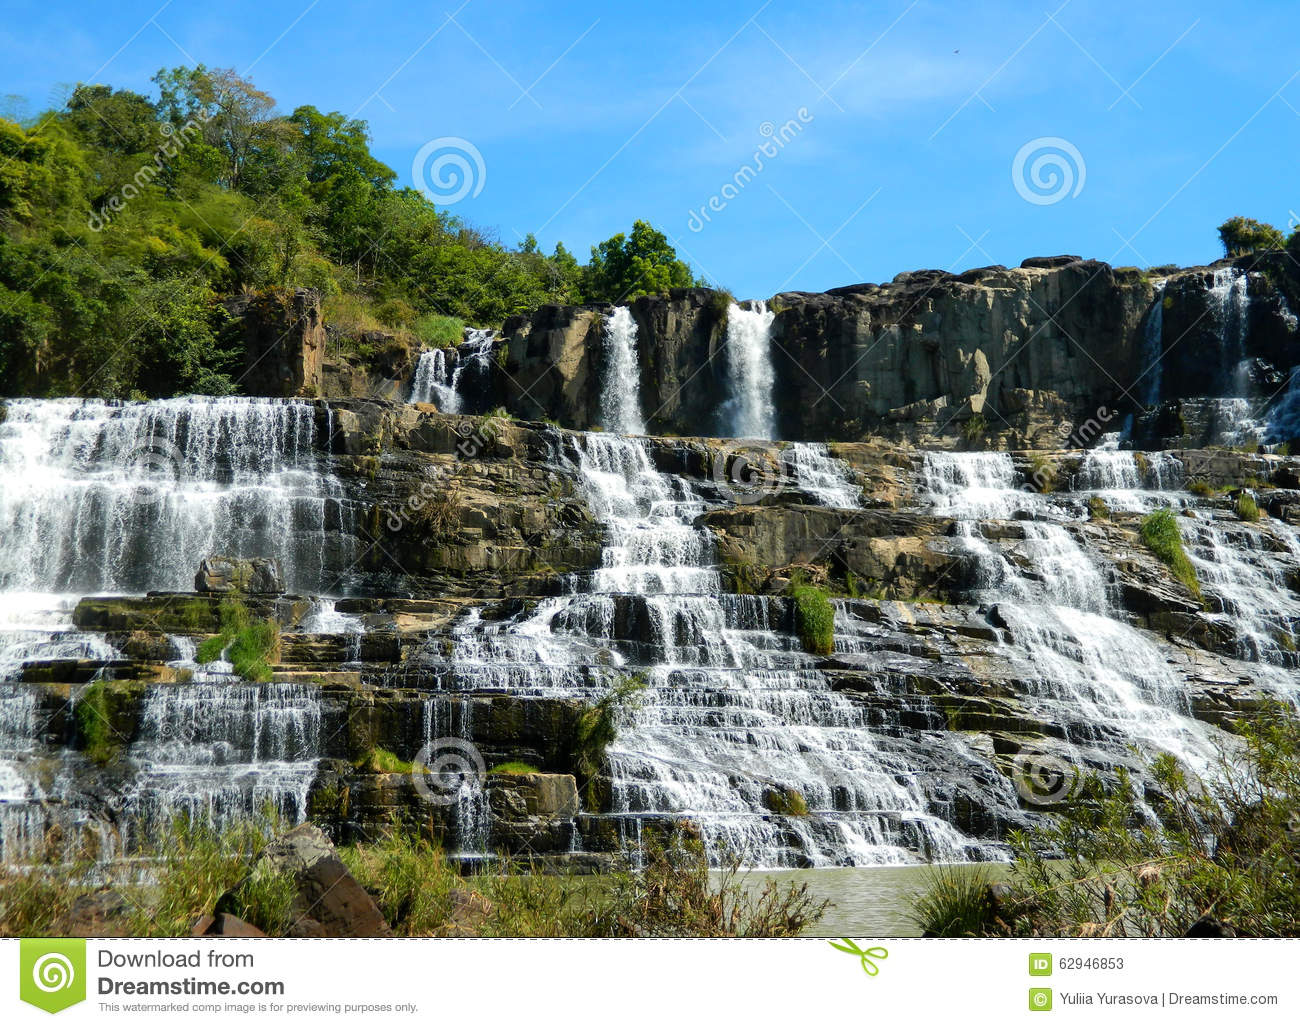 Pongour Waterfall clipart #5, Download drawings